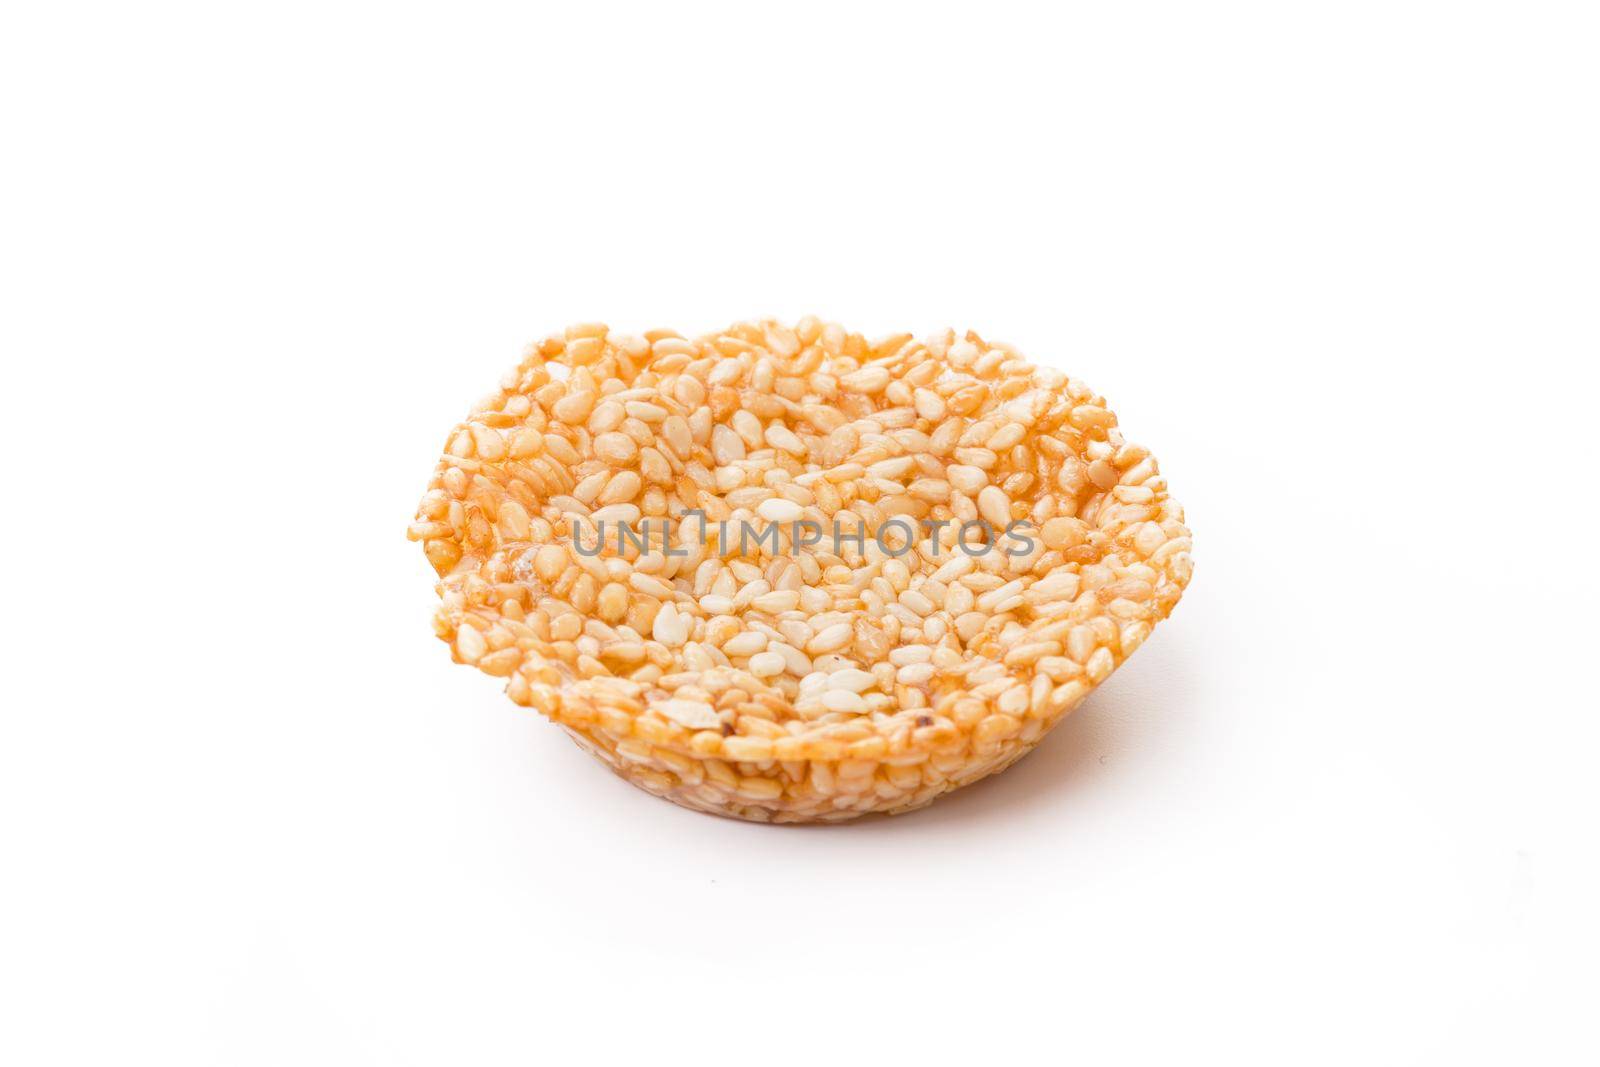 One oat baked cookie isolated on white background